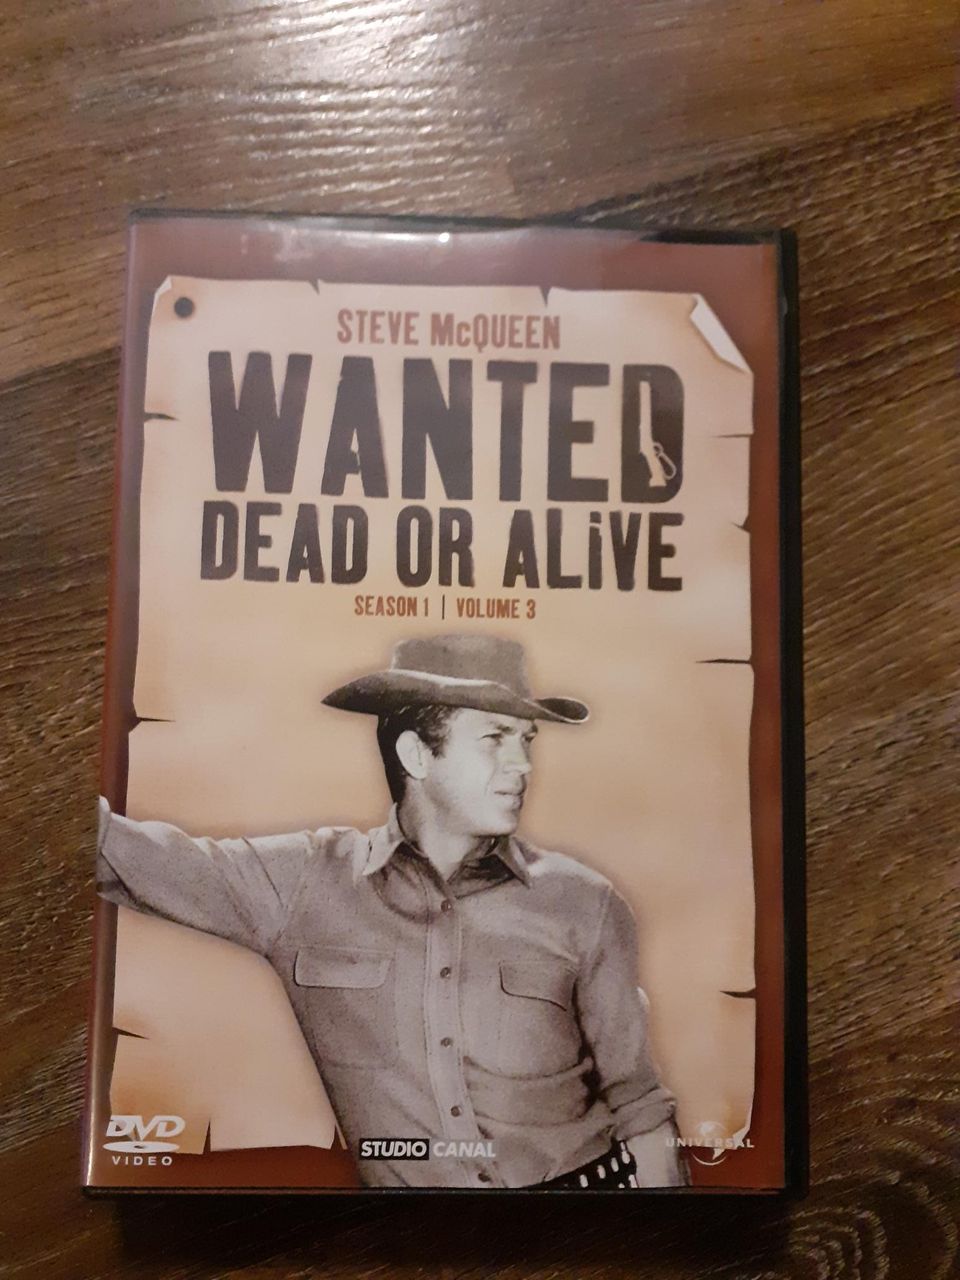 Wanted dead or alive - kausi 1 vol 3